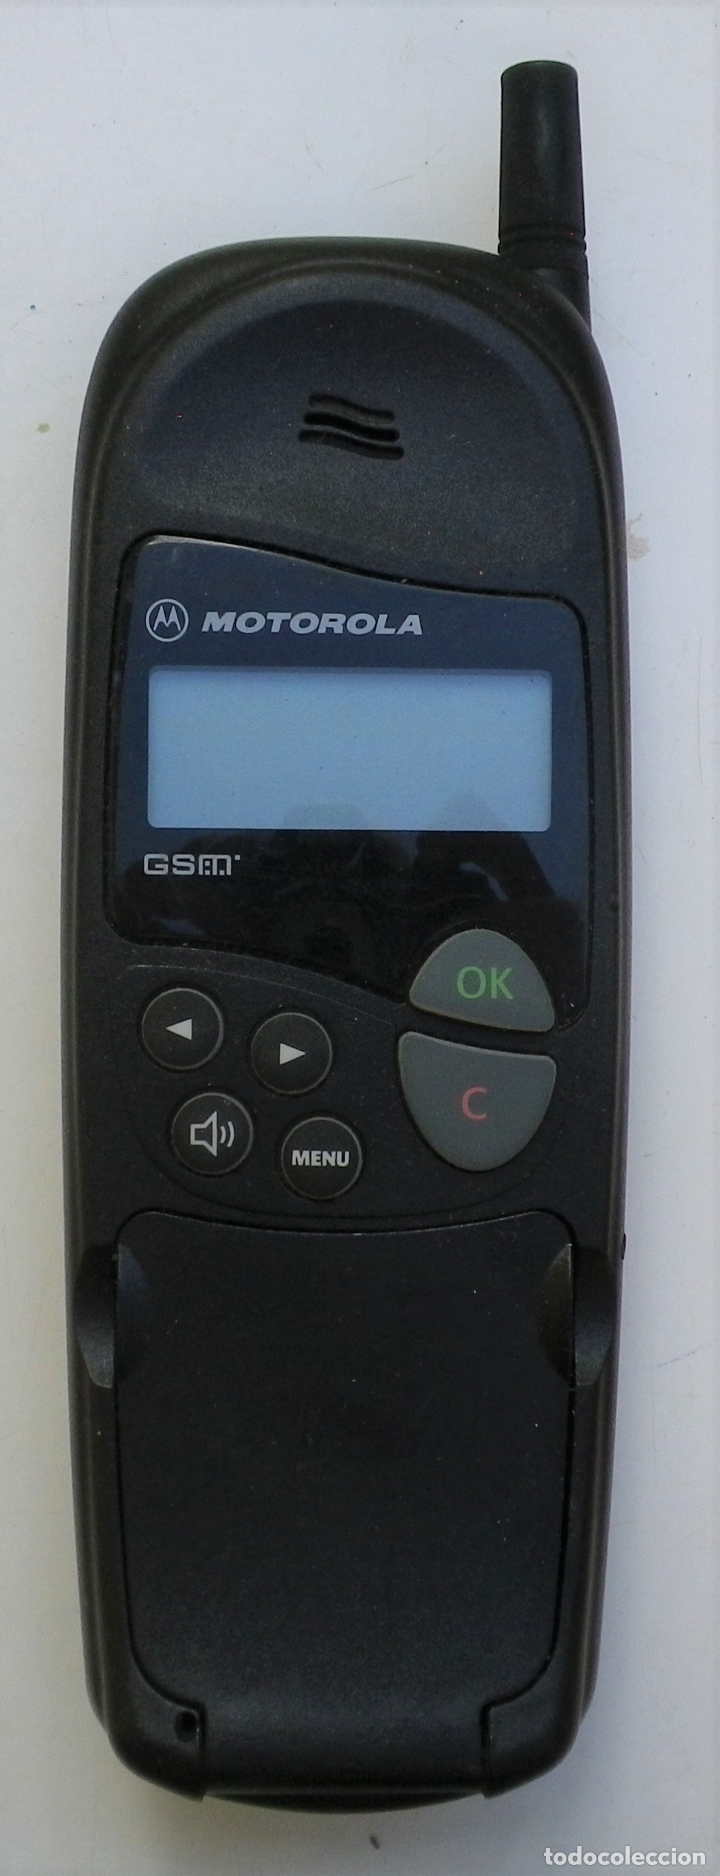 antiguo teléfono móvil marca motorola modelo s6 - Buy Other collectible  objects on todocoleccion